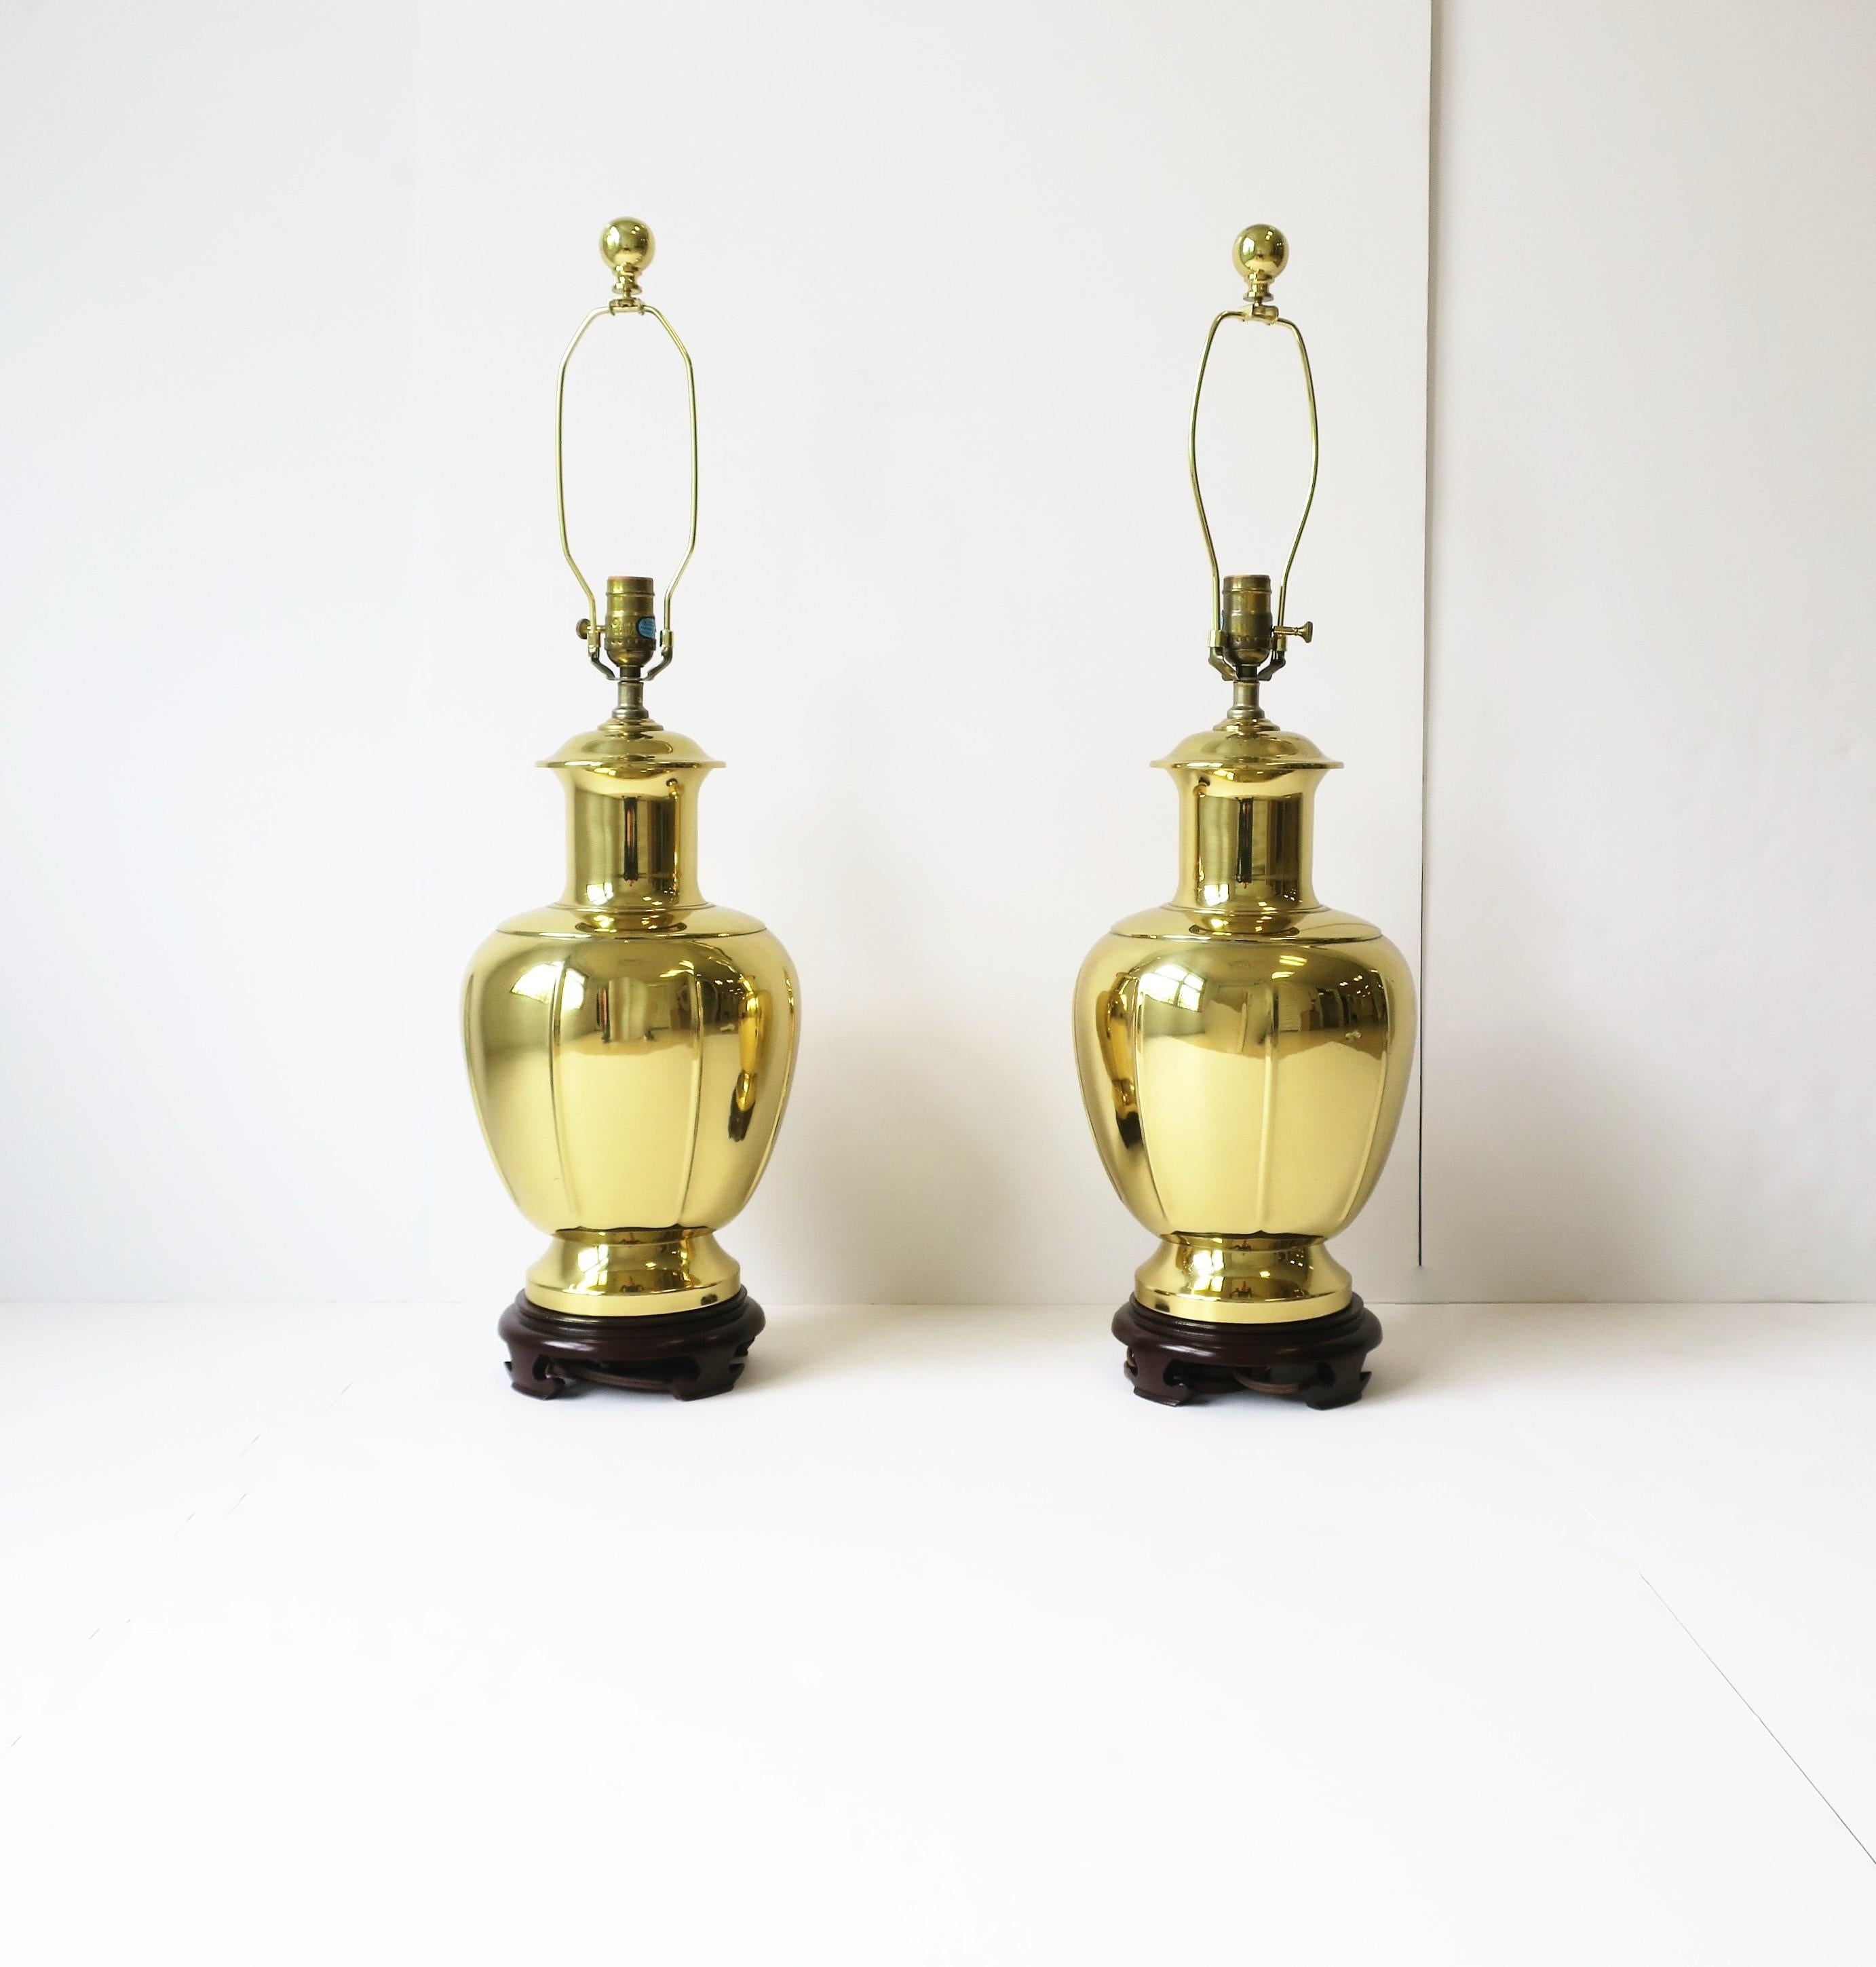 A pair of gold anodized brass desk or table lamps in the Chinoiserie style after designer James Mont, late-20th century, circa 1980s. Lamps have a wood base and brass ball finial. 

Dimensions: 
31.5